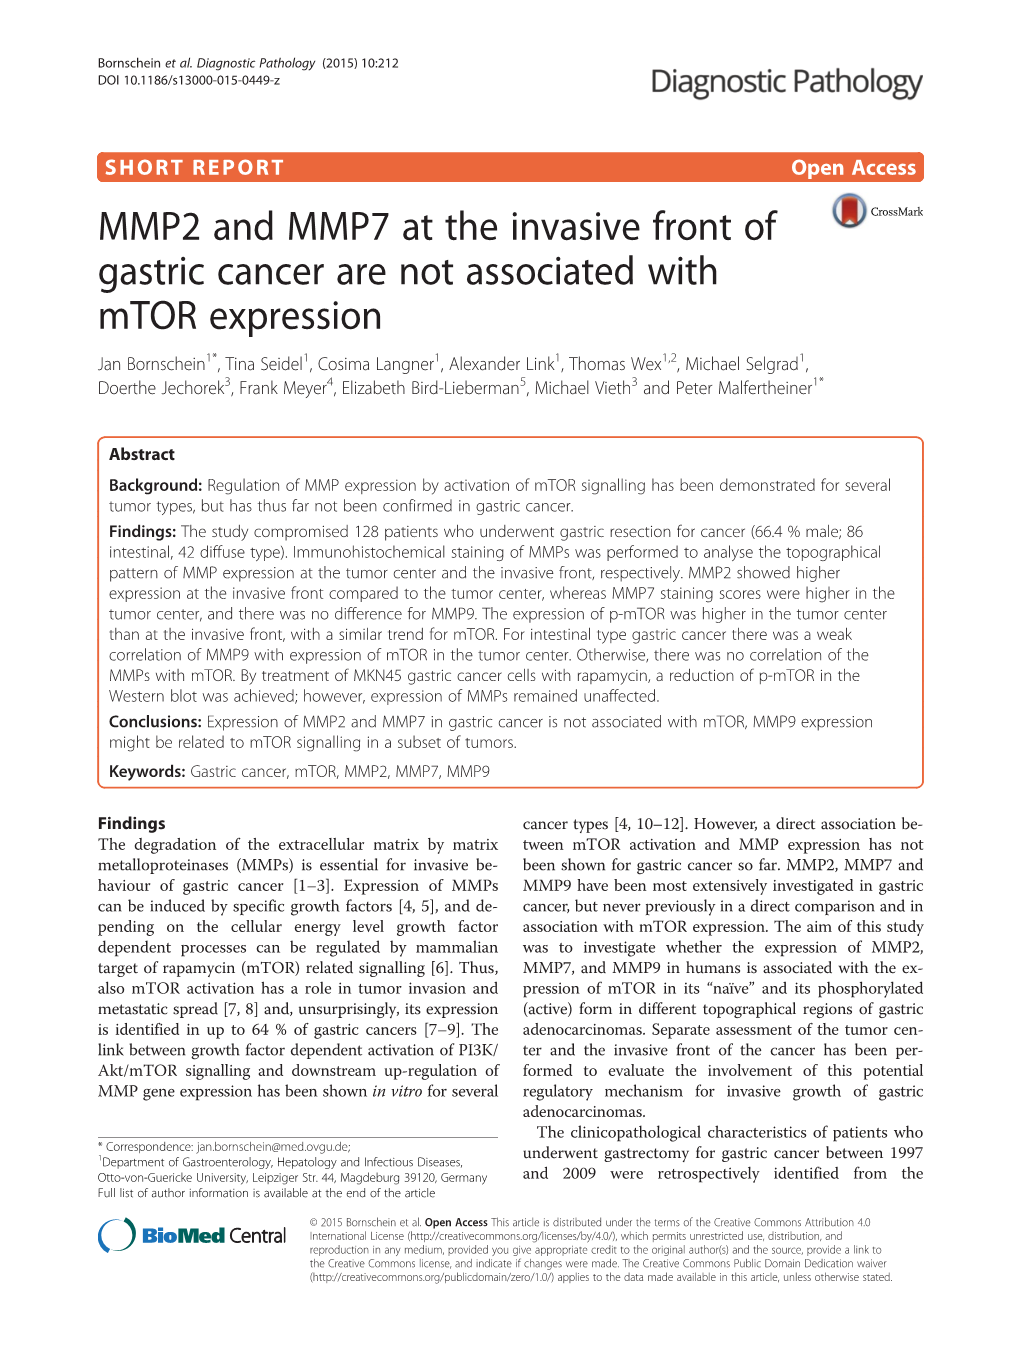 MMP2 and MMP7 at the Invasive Front of Gastric Cancer Are Not Associated